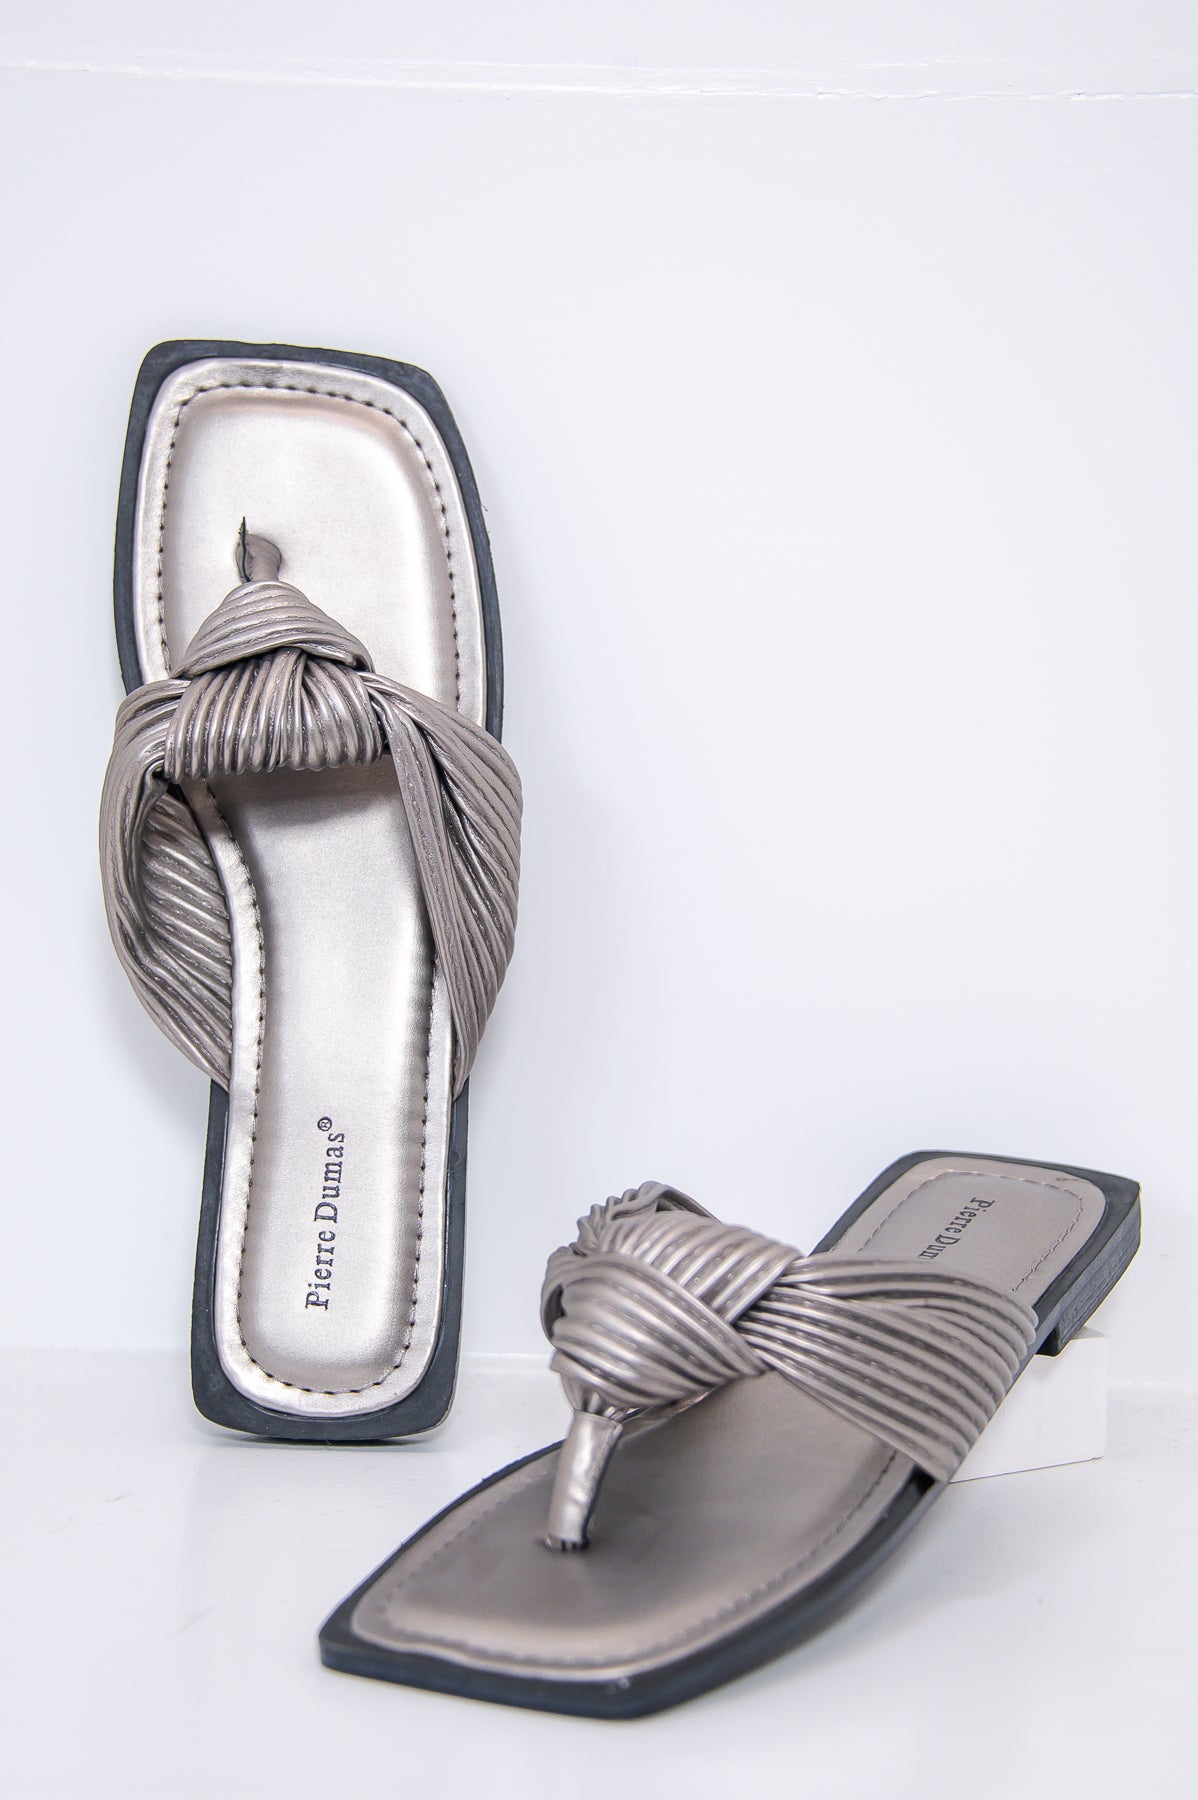 Sandy Paradise Pewter Solid Knot Sandals - SHO2699PW